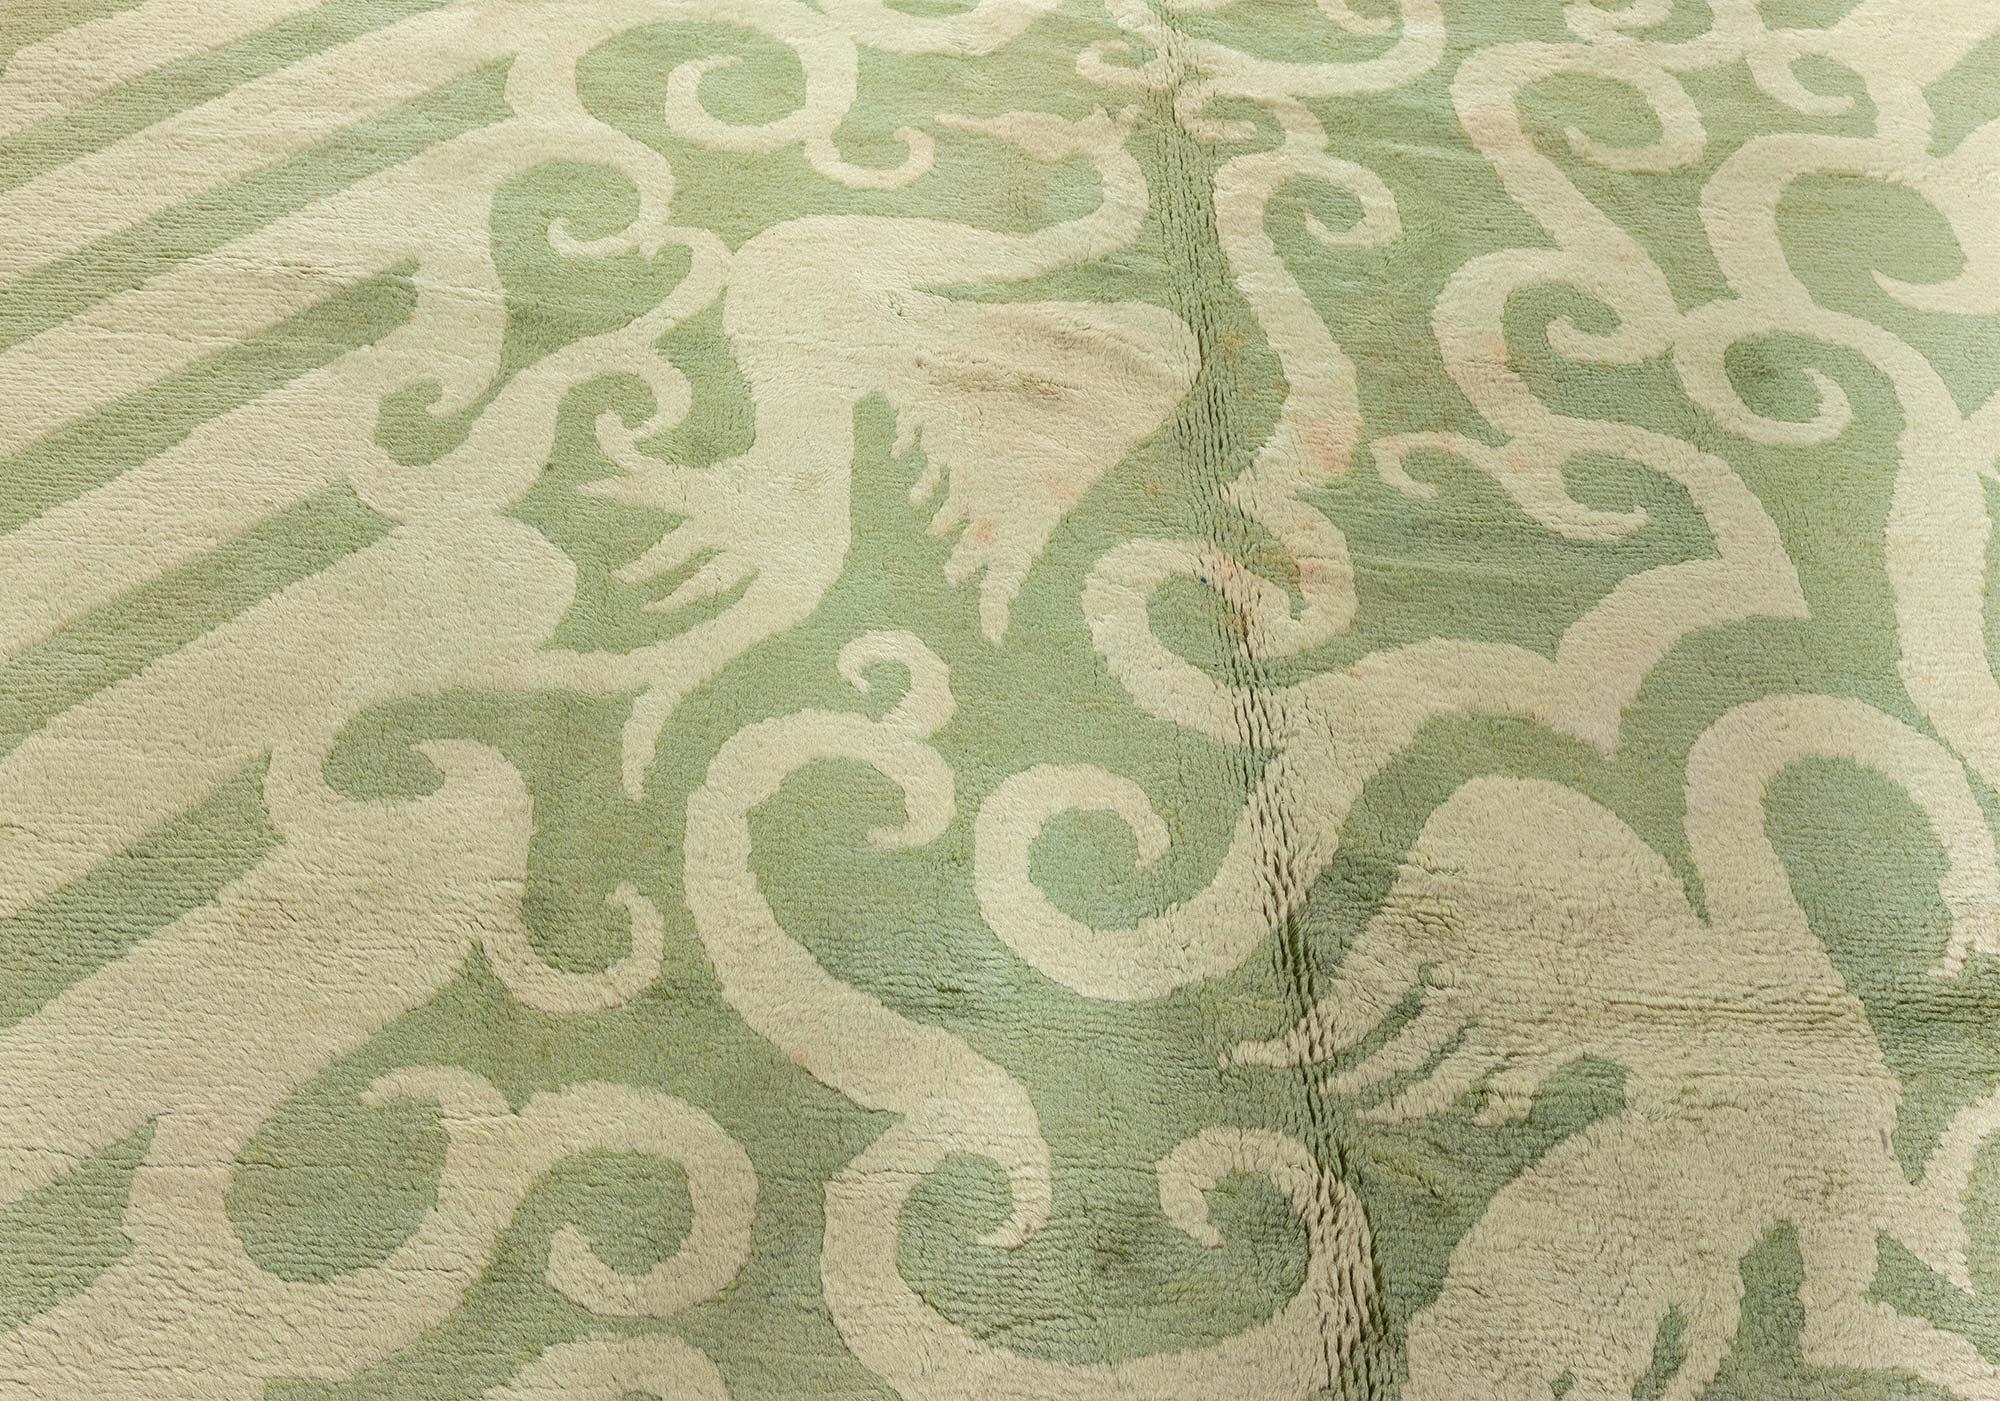 Vintage French Art Deco green handmade wool rug
Size: 8'2